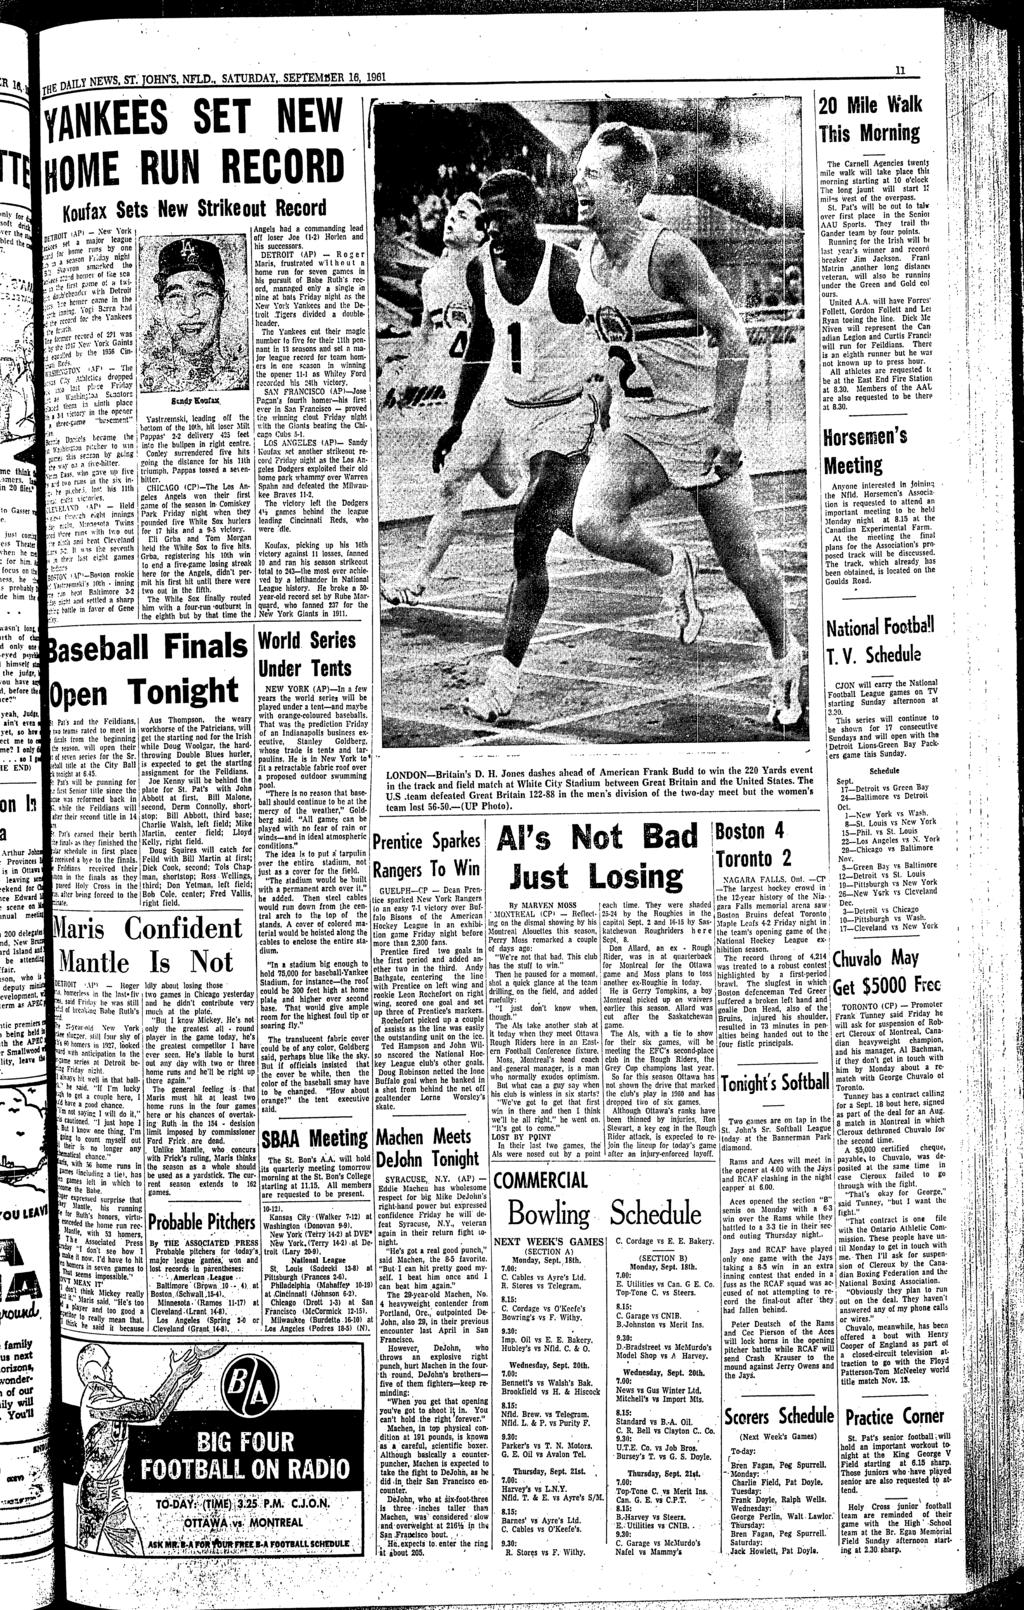 the DALY NEWS ST JOHNS, NFLD SATURDAY, SEPTEM~ER 6, YANKEES SET _NEW HOME RUN RECORD- 96 20 Me Wak Ths Mornng T Koufax Sets New Strke out Record The Carne A-gences twentj me wak w ake pace th mornng